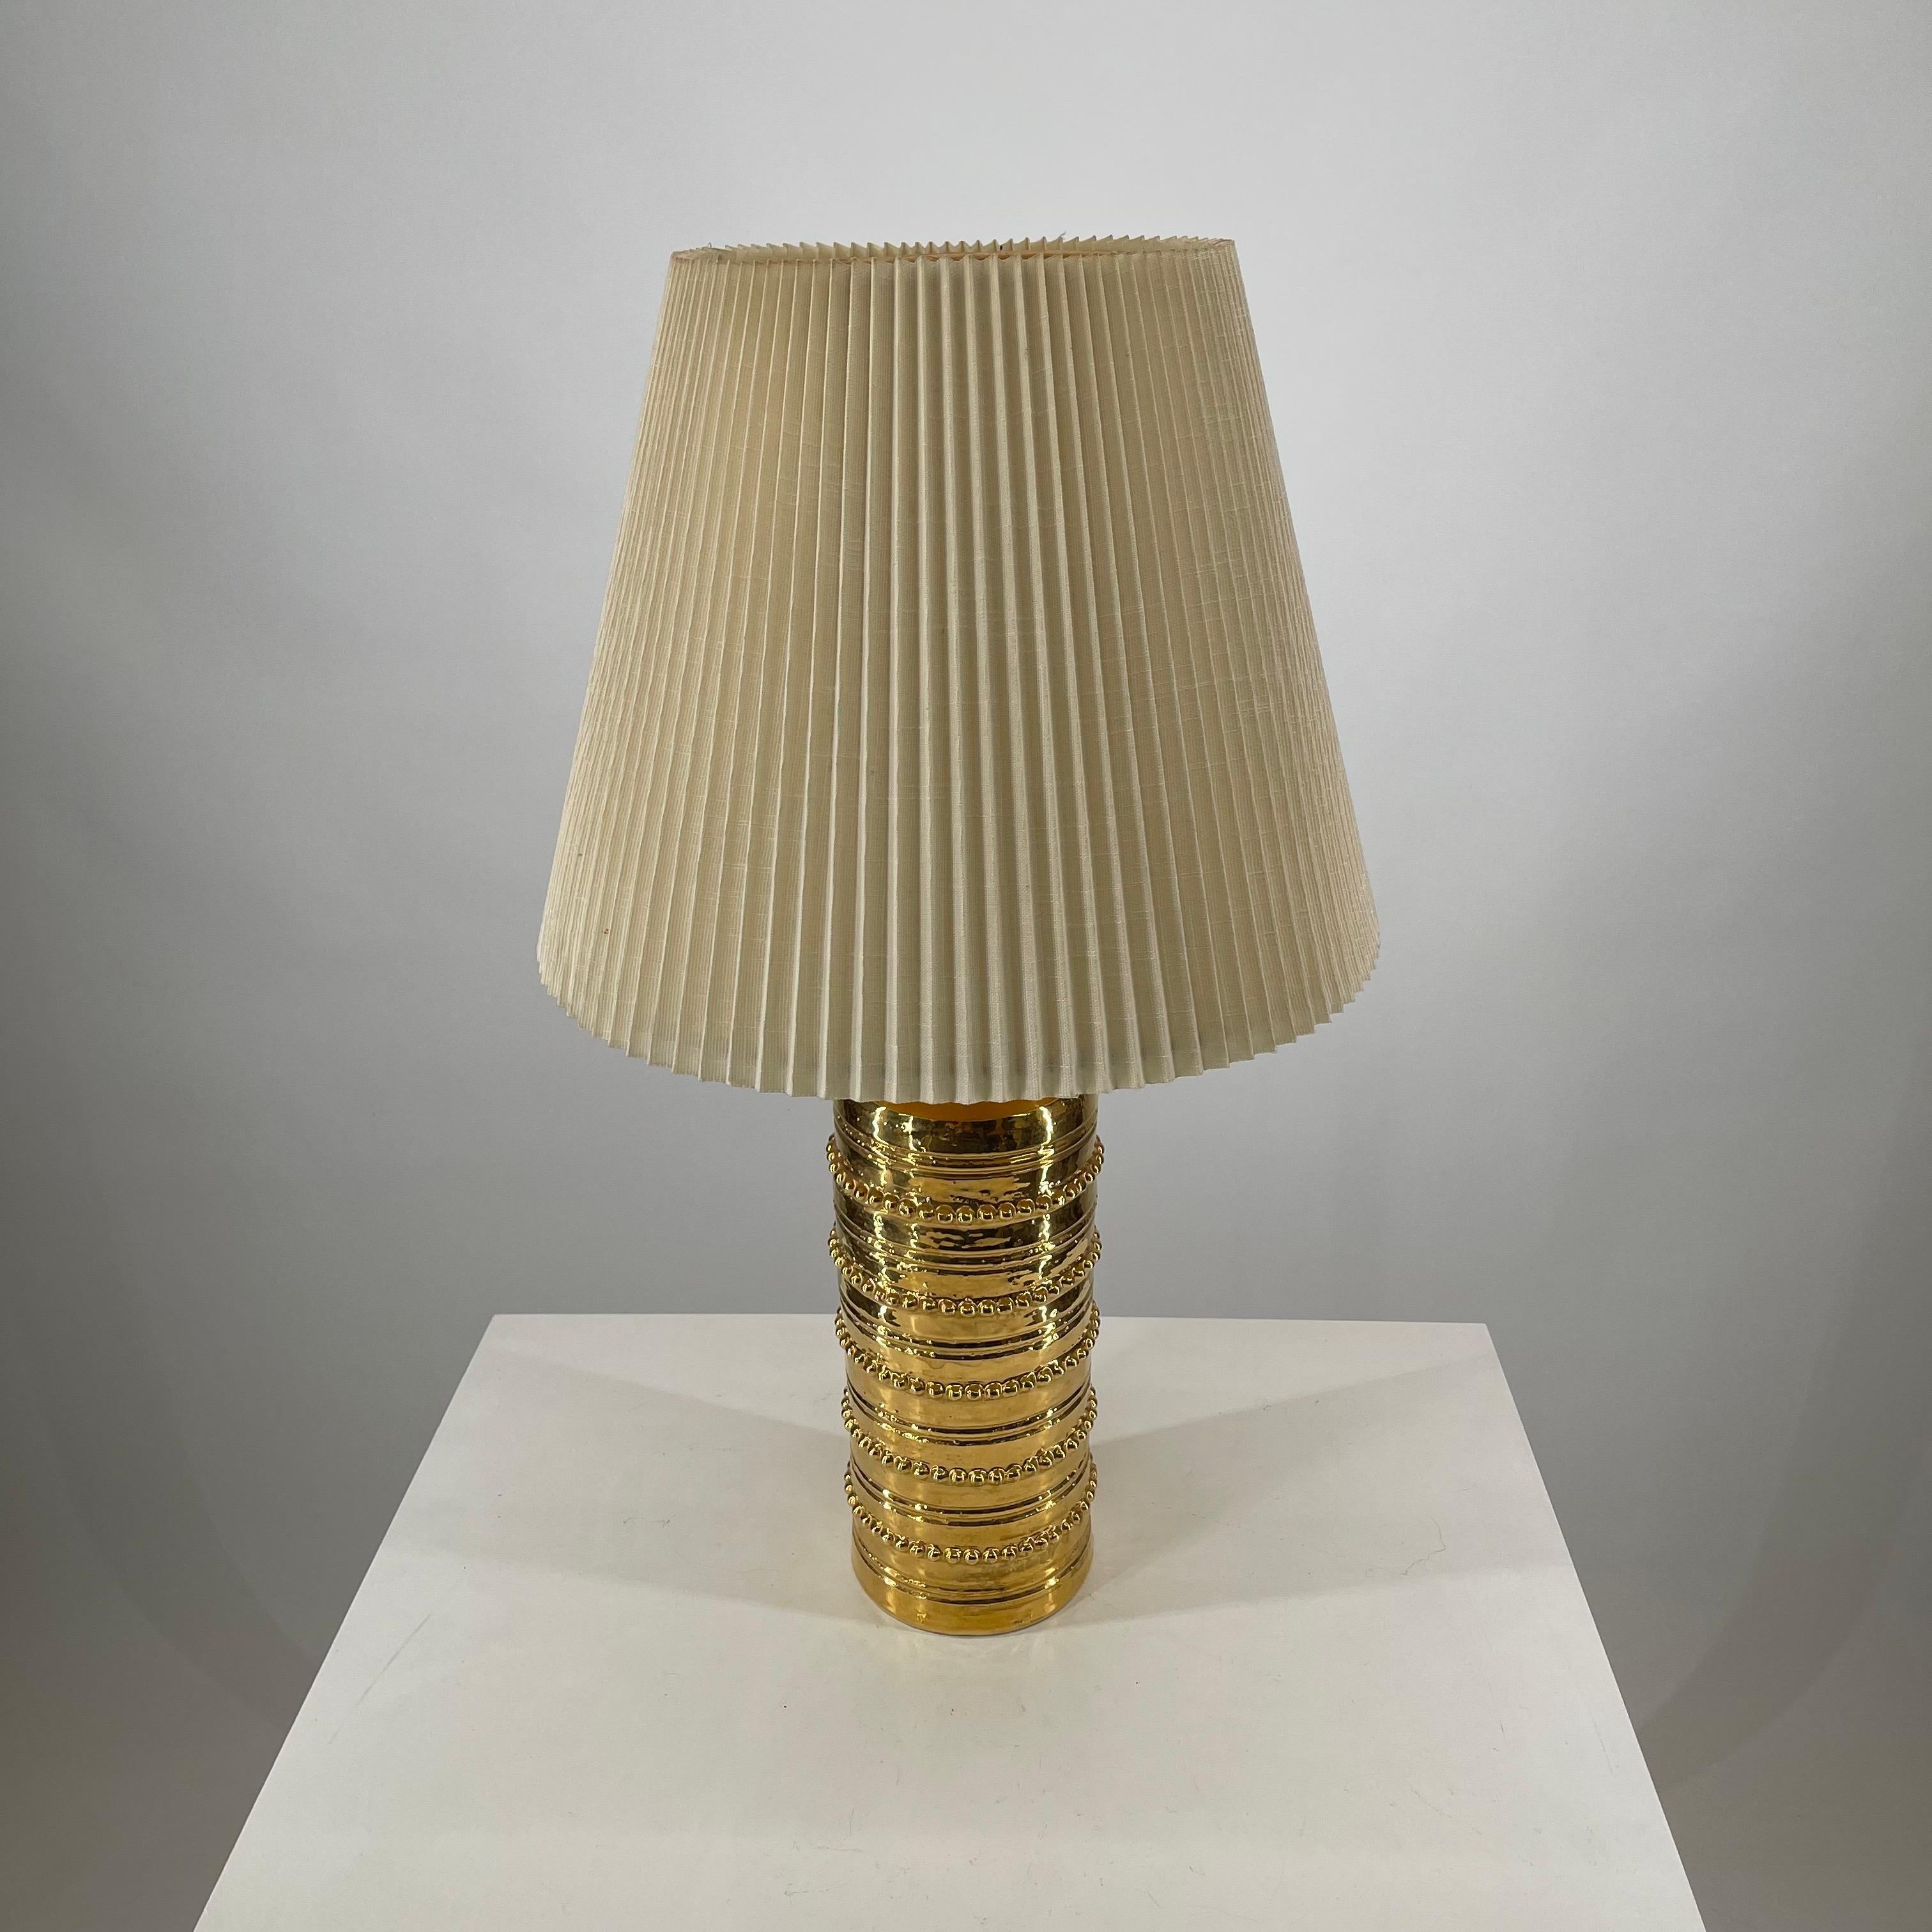 Mid-Century Modern 1 of 3 Bitossi Gold Glazed Ceramic Table Lamp by Miranda of Sweden, 1965 For Sale